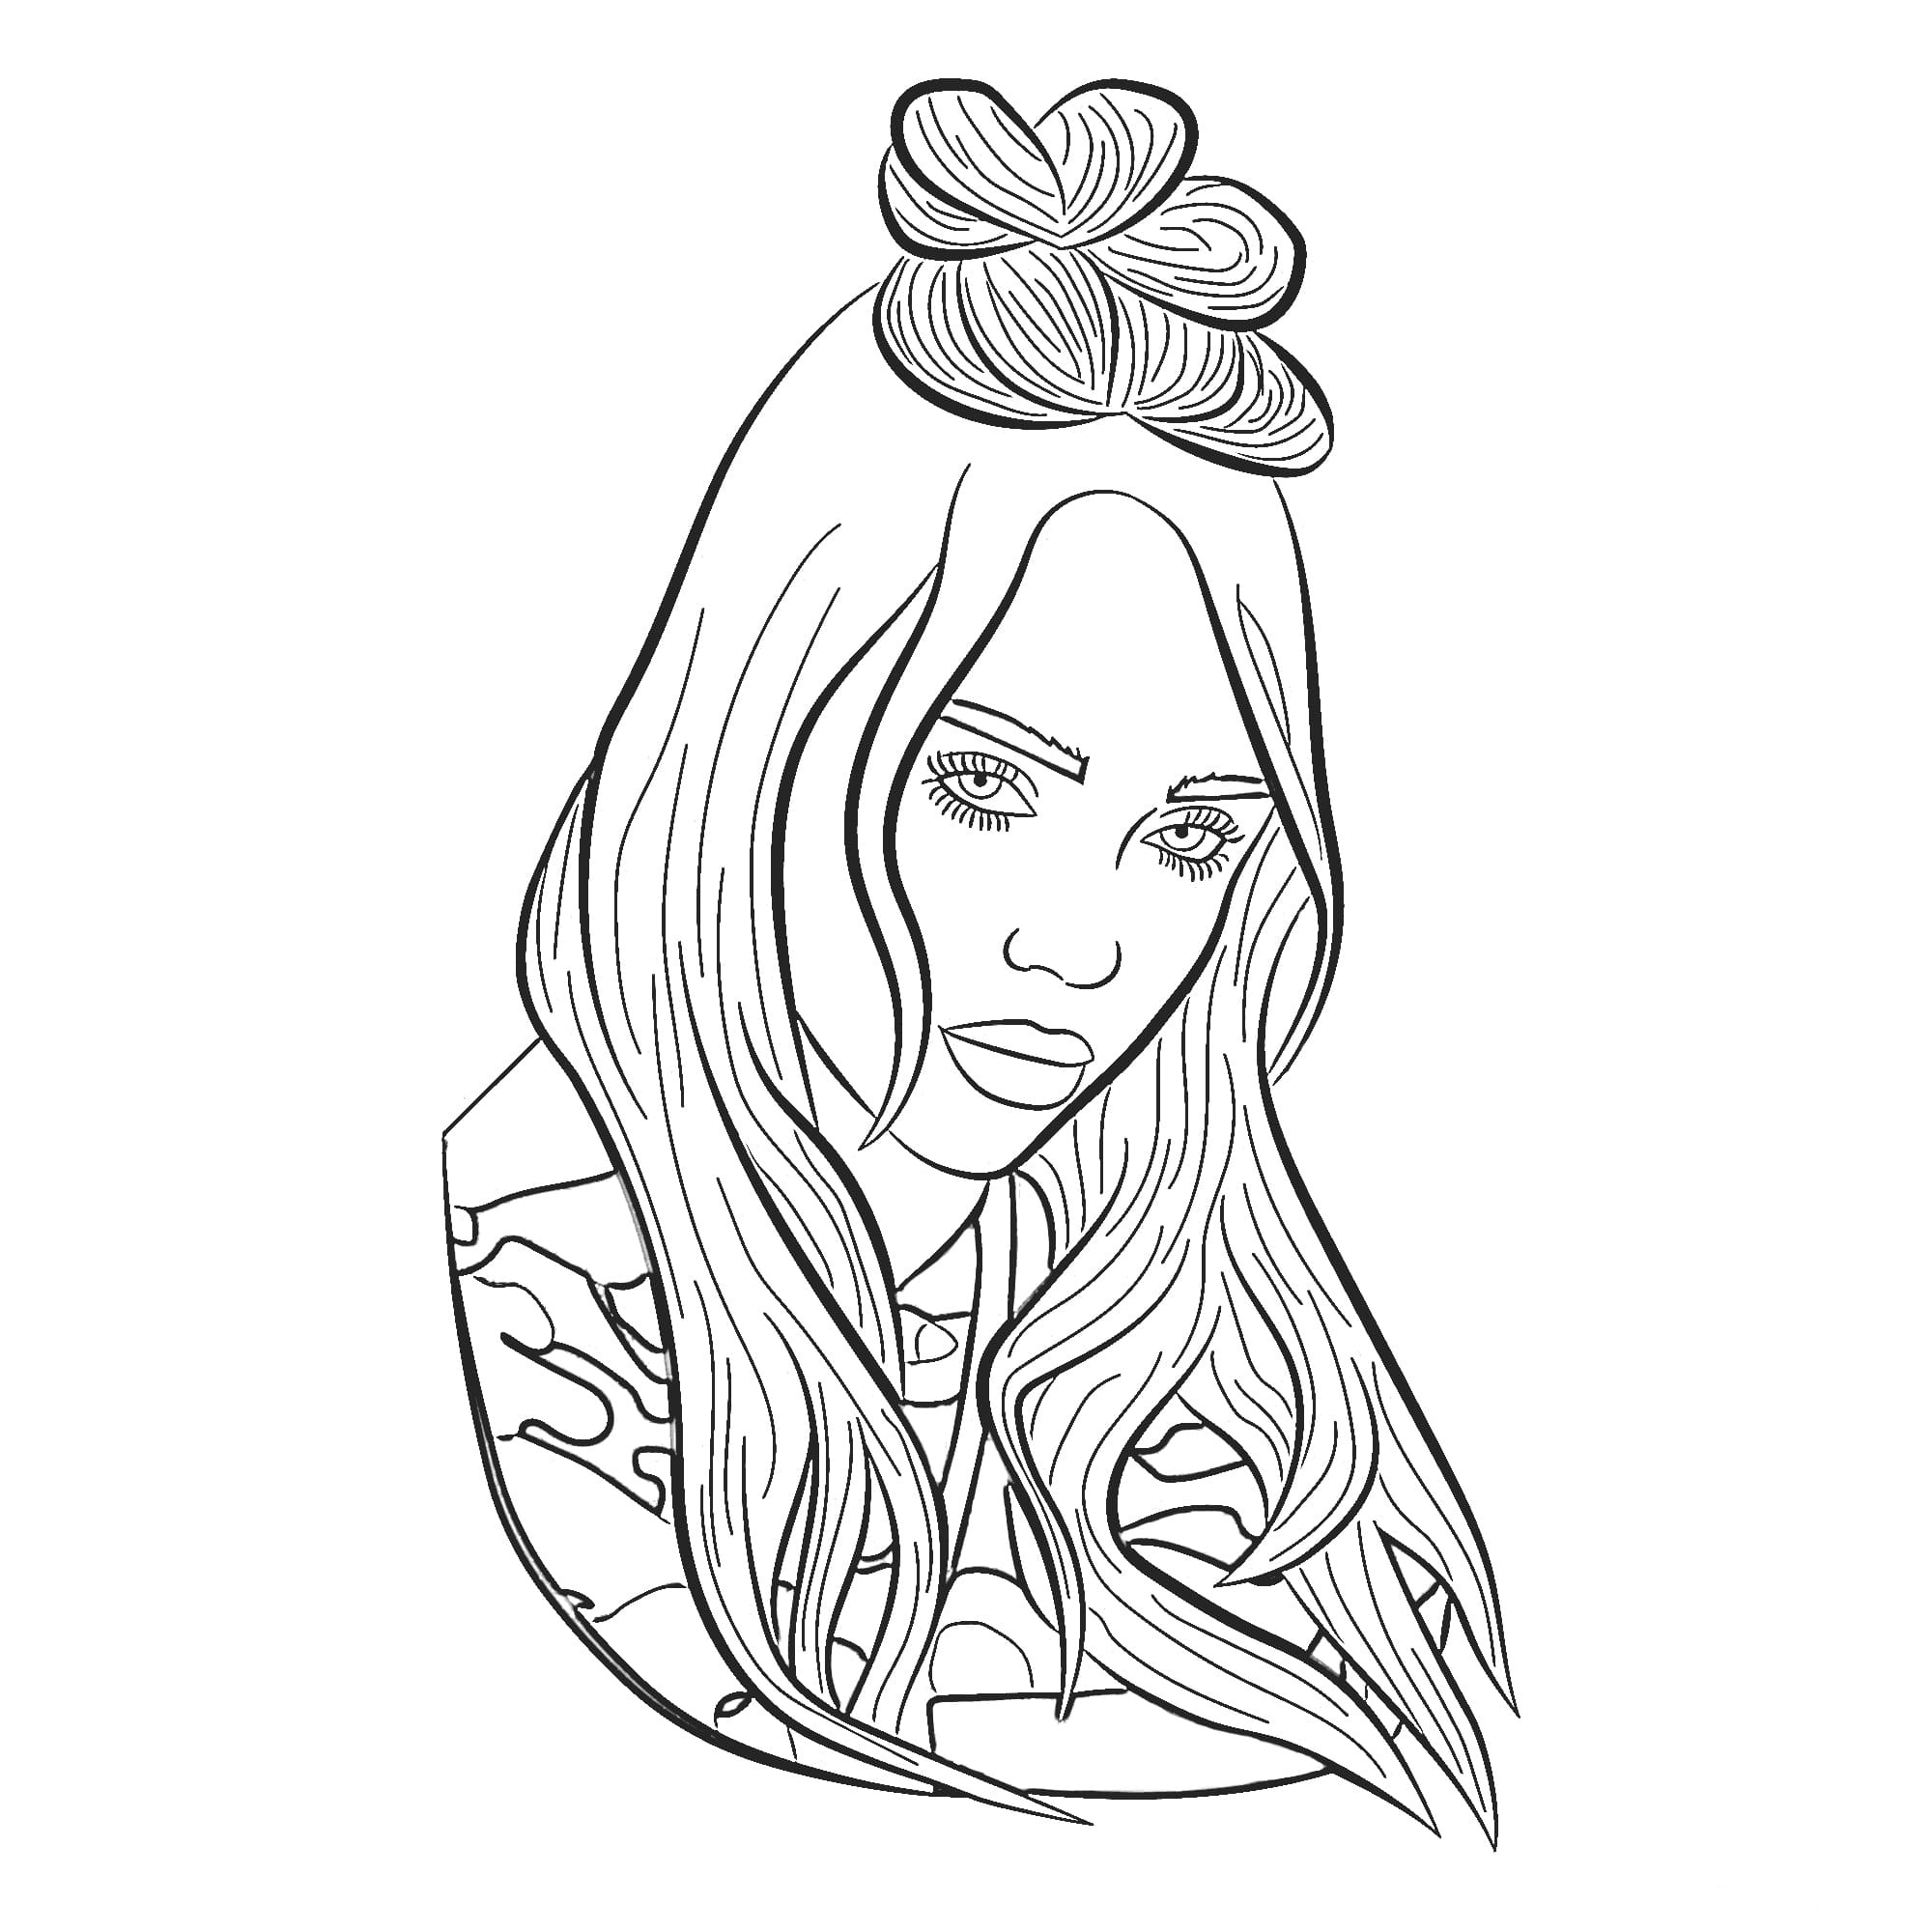 818 Animal Billie Eilish Coloring Pages with Animal character